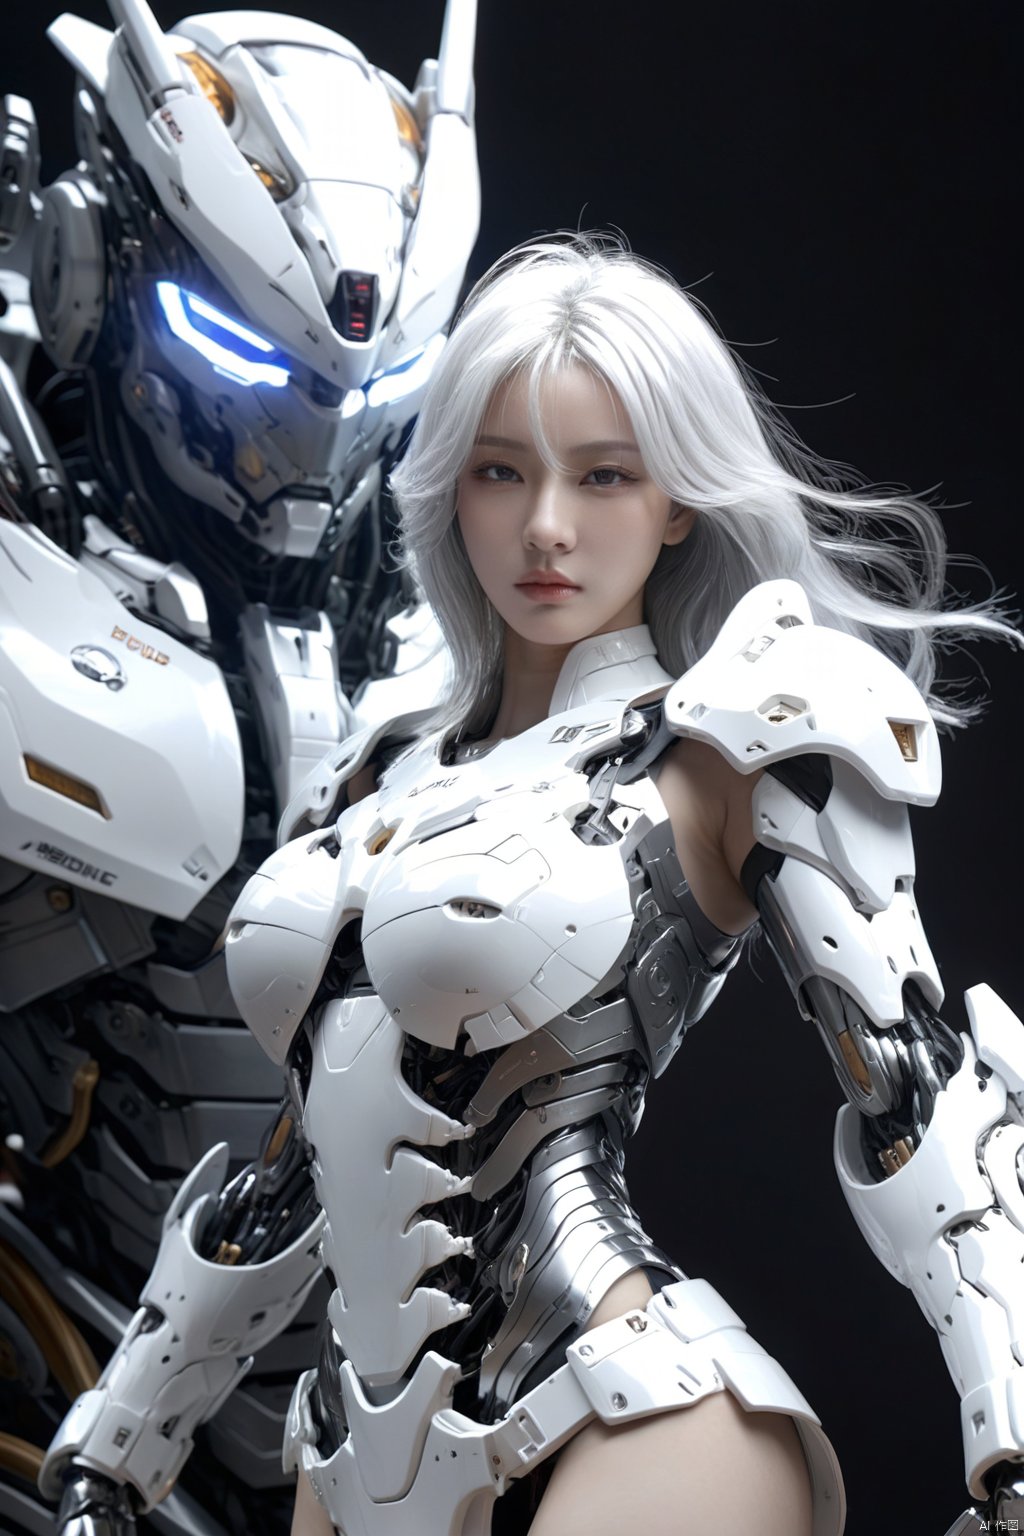  HUBG_Mecha_Armor,
1 girl, huge breasts, huge body, messy white hair, realistic, perfect murge, ,Mecha body,Young beauty spirit .Best Quality, photorealistic, ultra-detailed, finely detailed, high resolution, perfect dynamic composition, sharp-focus,b3rli,dongtan dress,mature female,